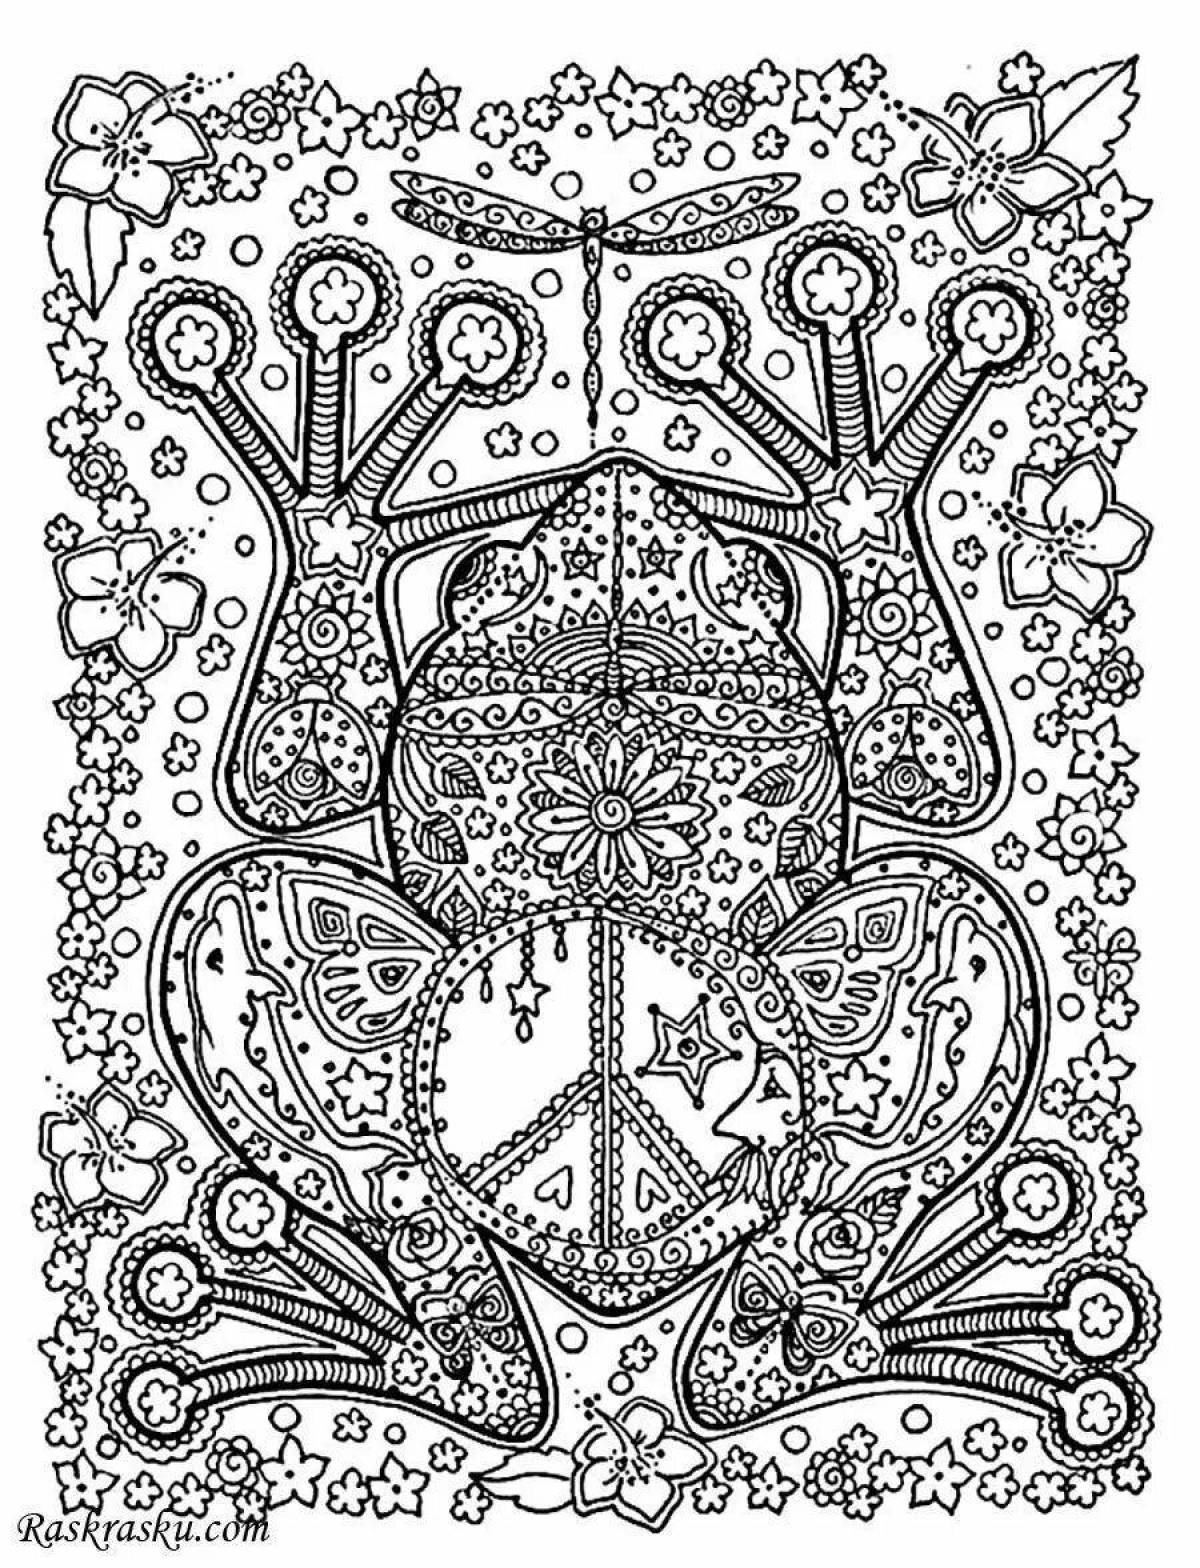 Relaxing coloring book to relax the nervous system